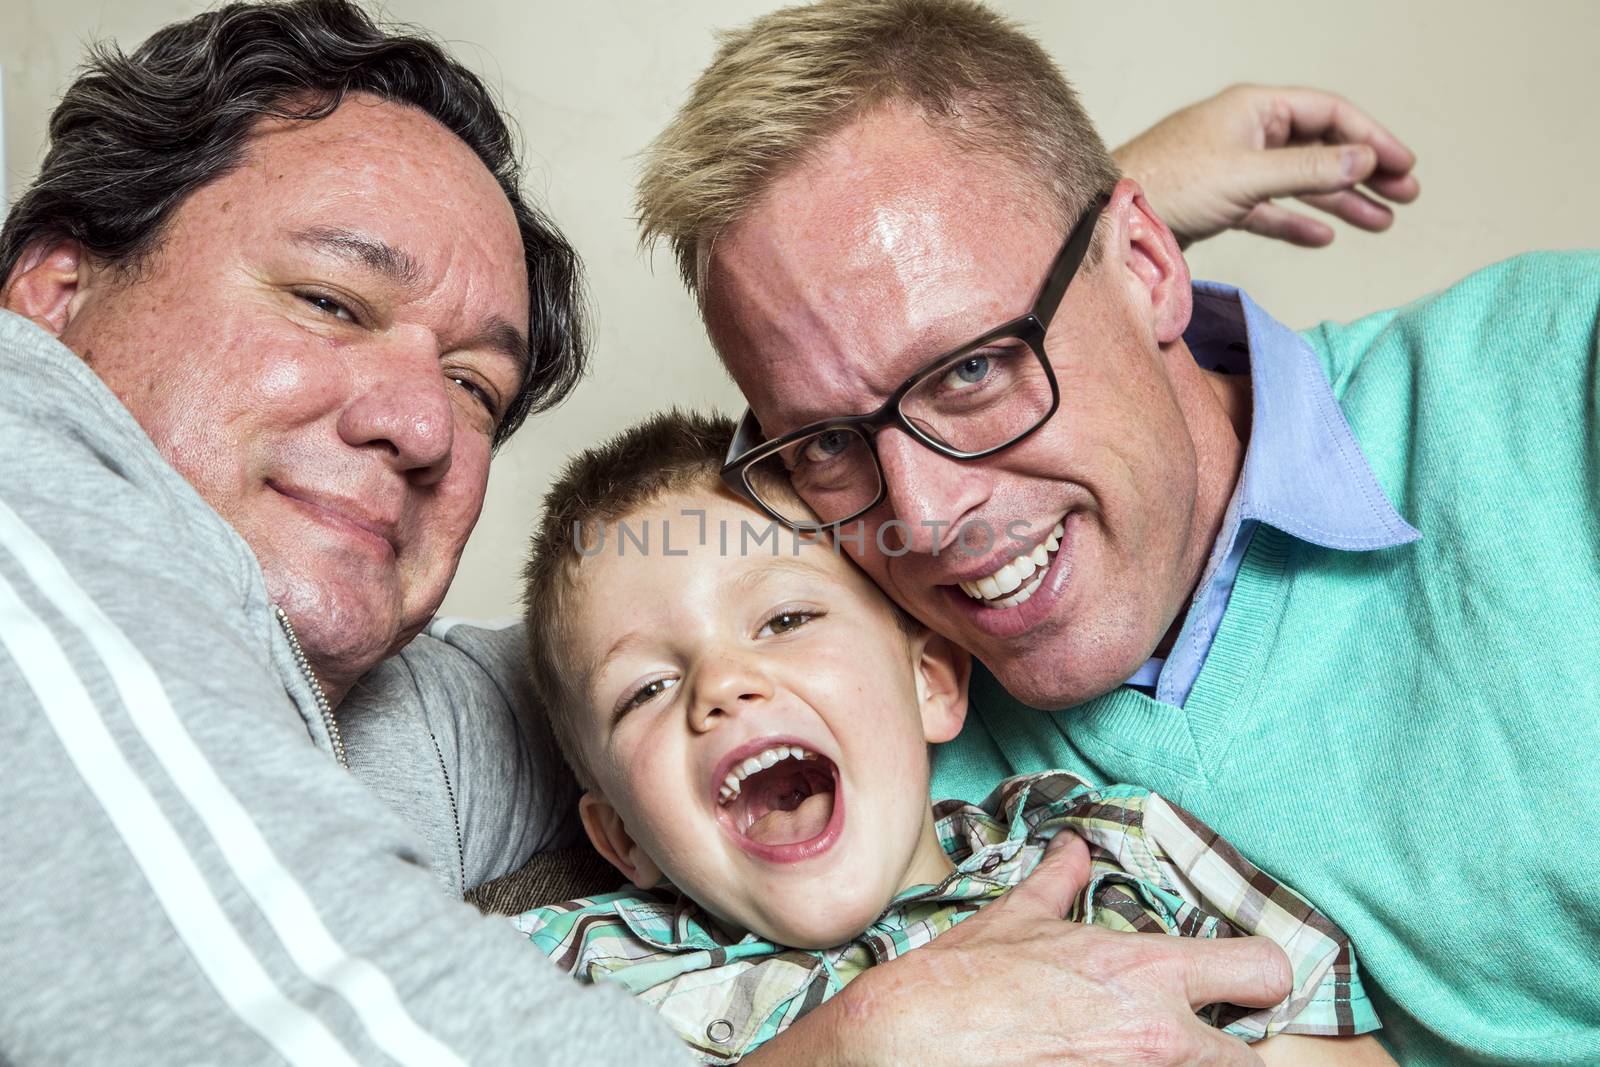 Two gay men hug their happy young son